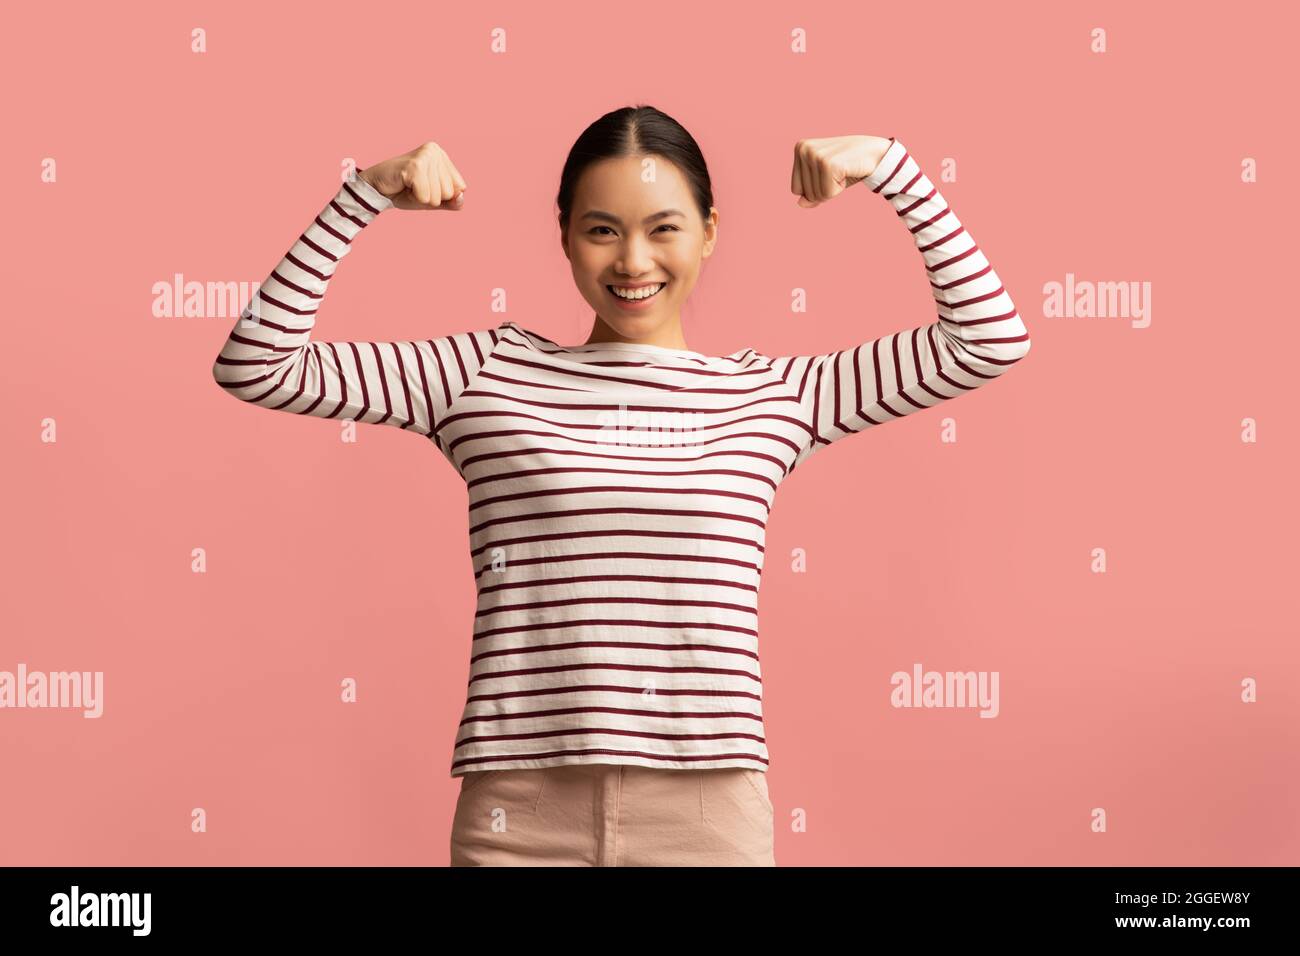 Feminism And Women Power Concept. Portrait Of Strong Powerful Asian Lady Raising Hands And Showing Her Biceps, Positive Korean Female Standing Isolate Stock Photo